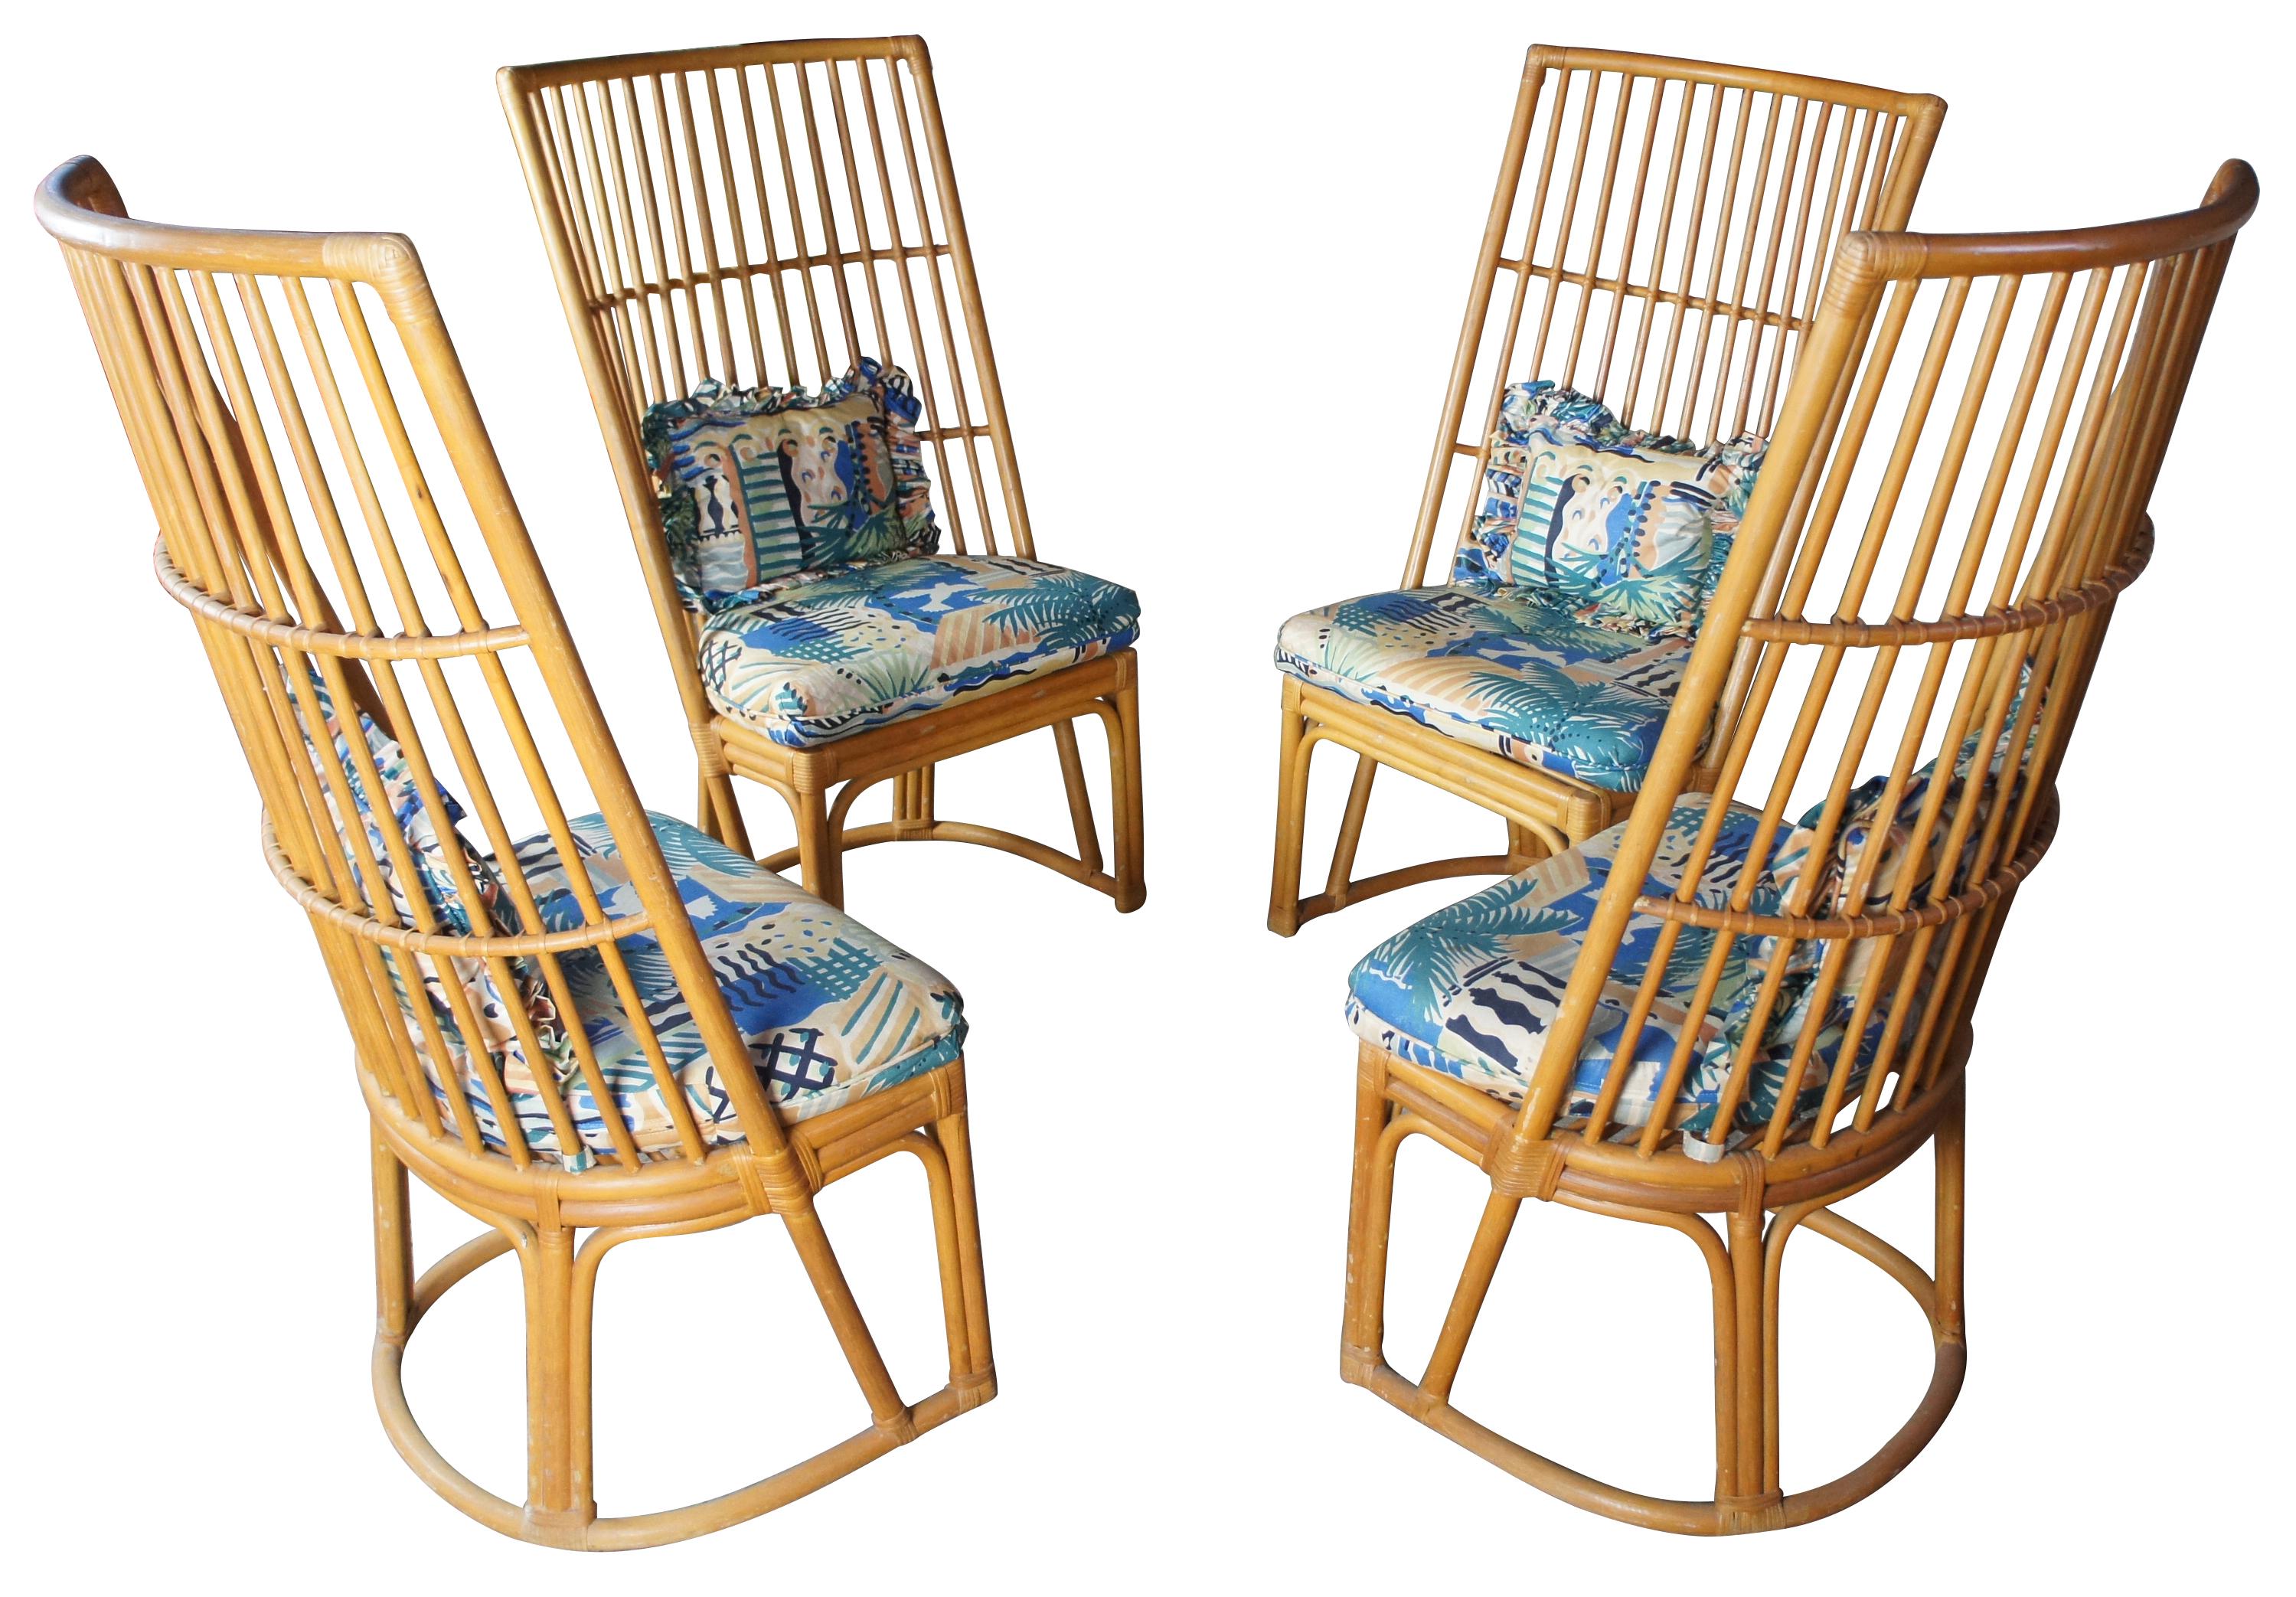 Boho chic bamboo highback chairs Bohemian rattan 1970s Mid-Century Modern 51

Amazing set of four bamboo boho chic chairs. Feature a wrap around bentwood back with rattan accents. Upholstered with lower back cushion. 

 